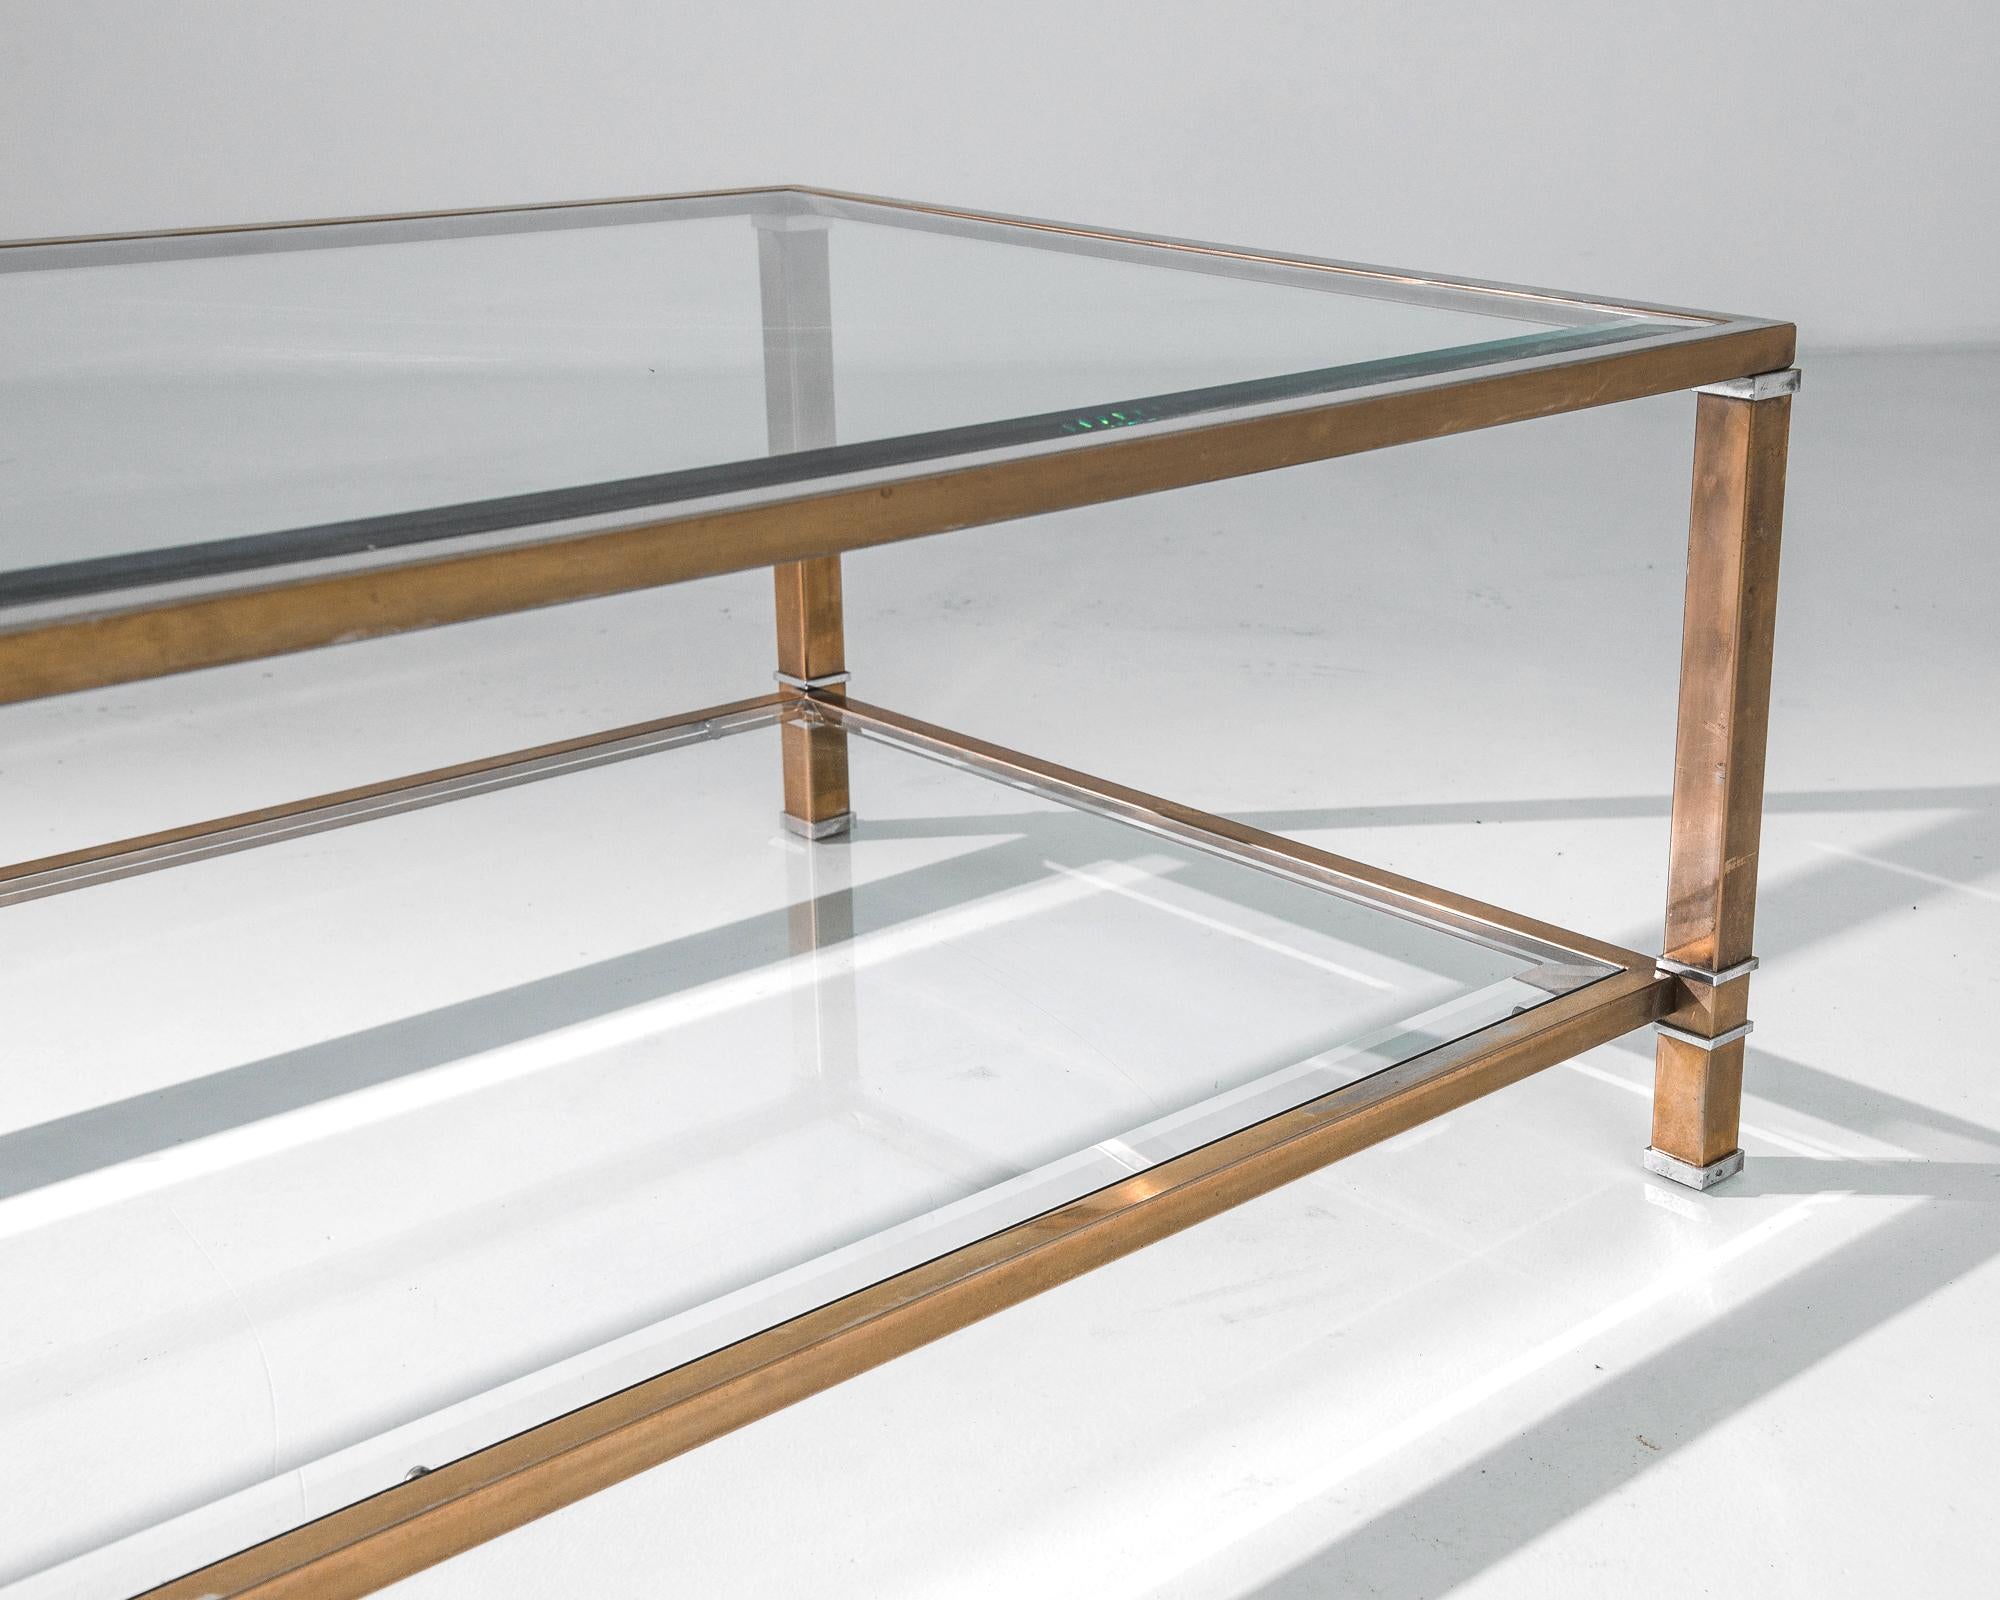 Plated 1950s French Brass Coffee Table with Glass Top